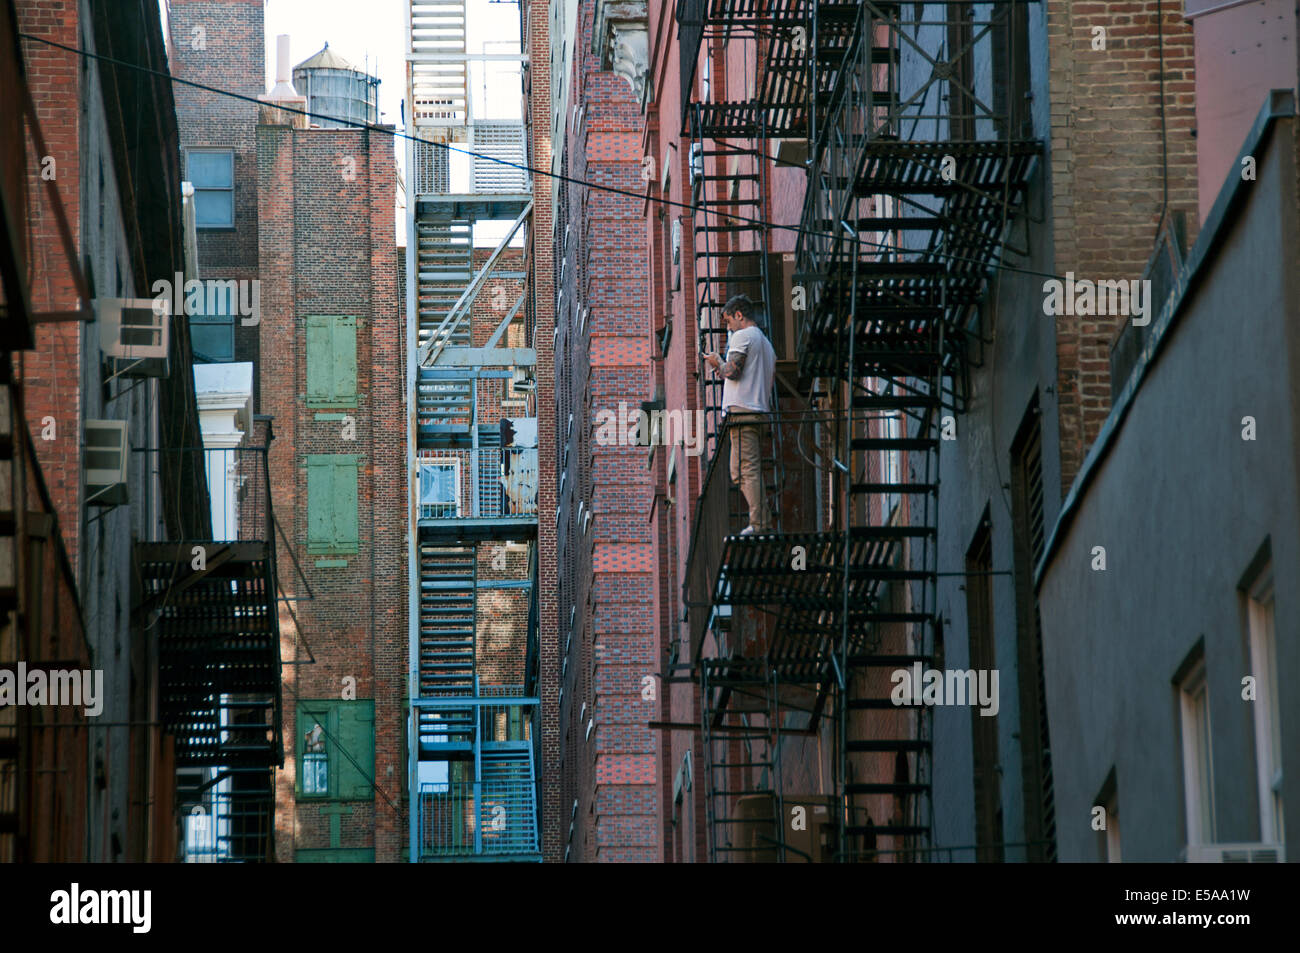 Narrow alleyway with fire escapes in Soho lower East side Manhattan New York City Stock Photo